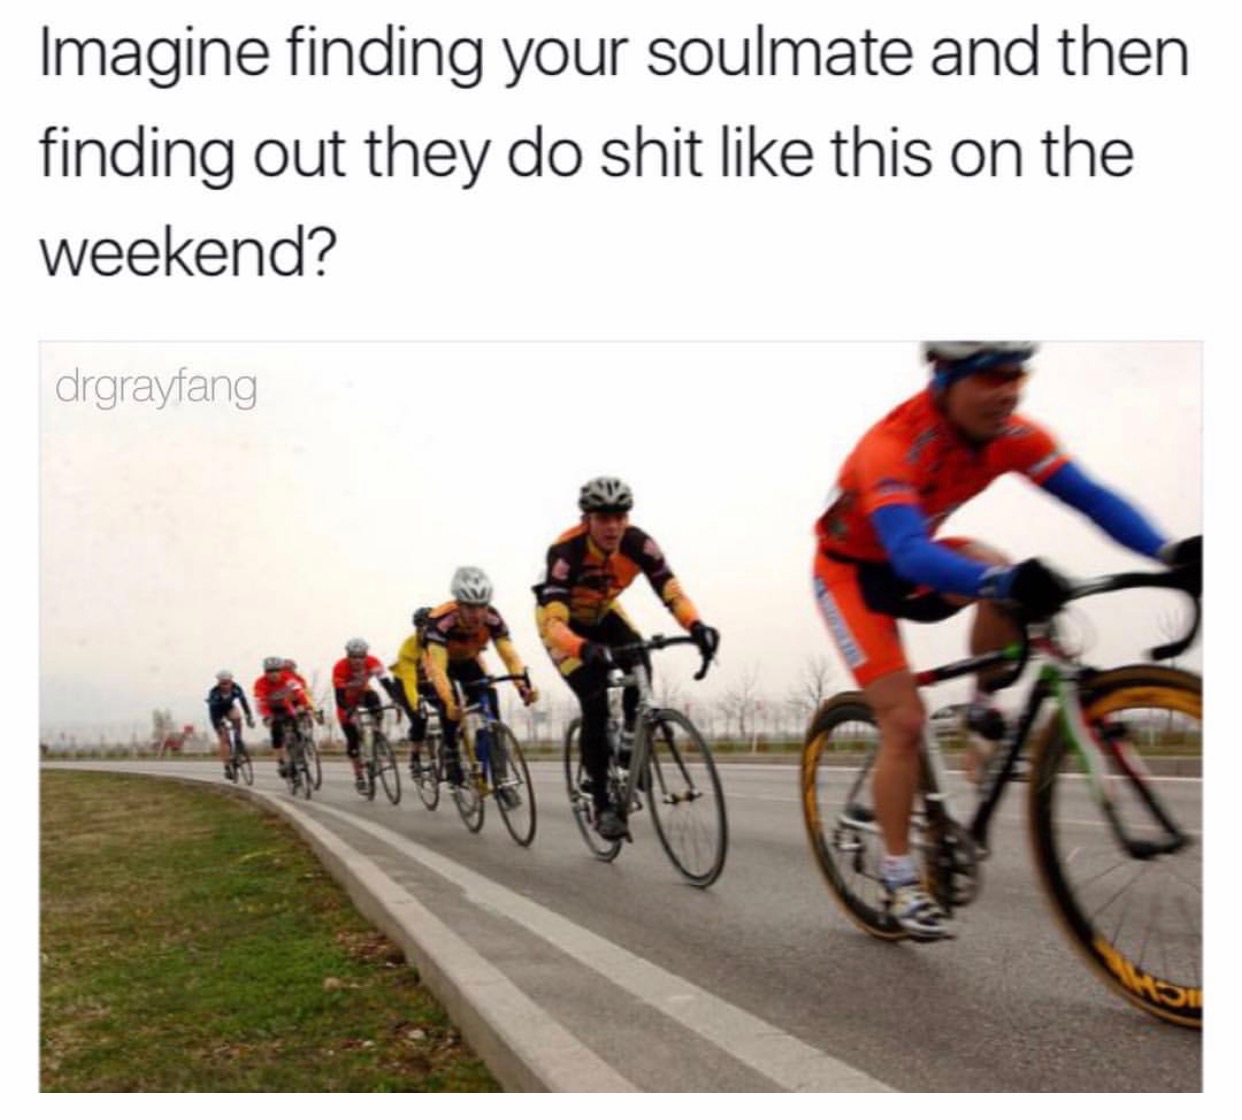 memes - imagine finding your soulmate meme - Imagine finding your soulmate and then finding out they do shit this on the weekend? drgrayfang